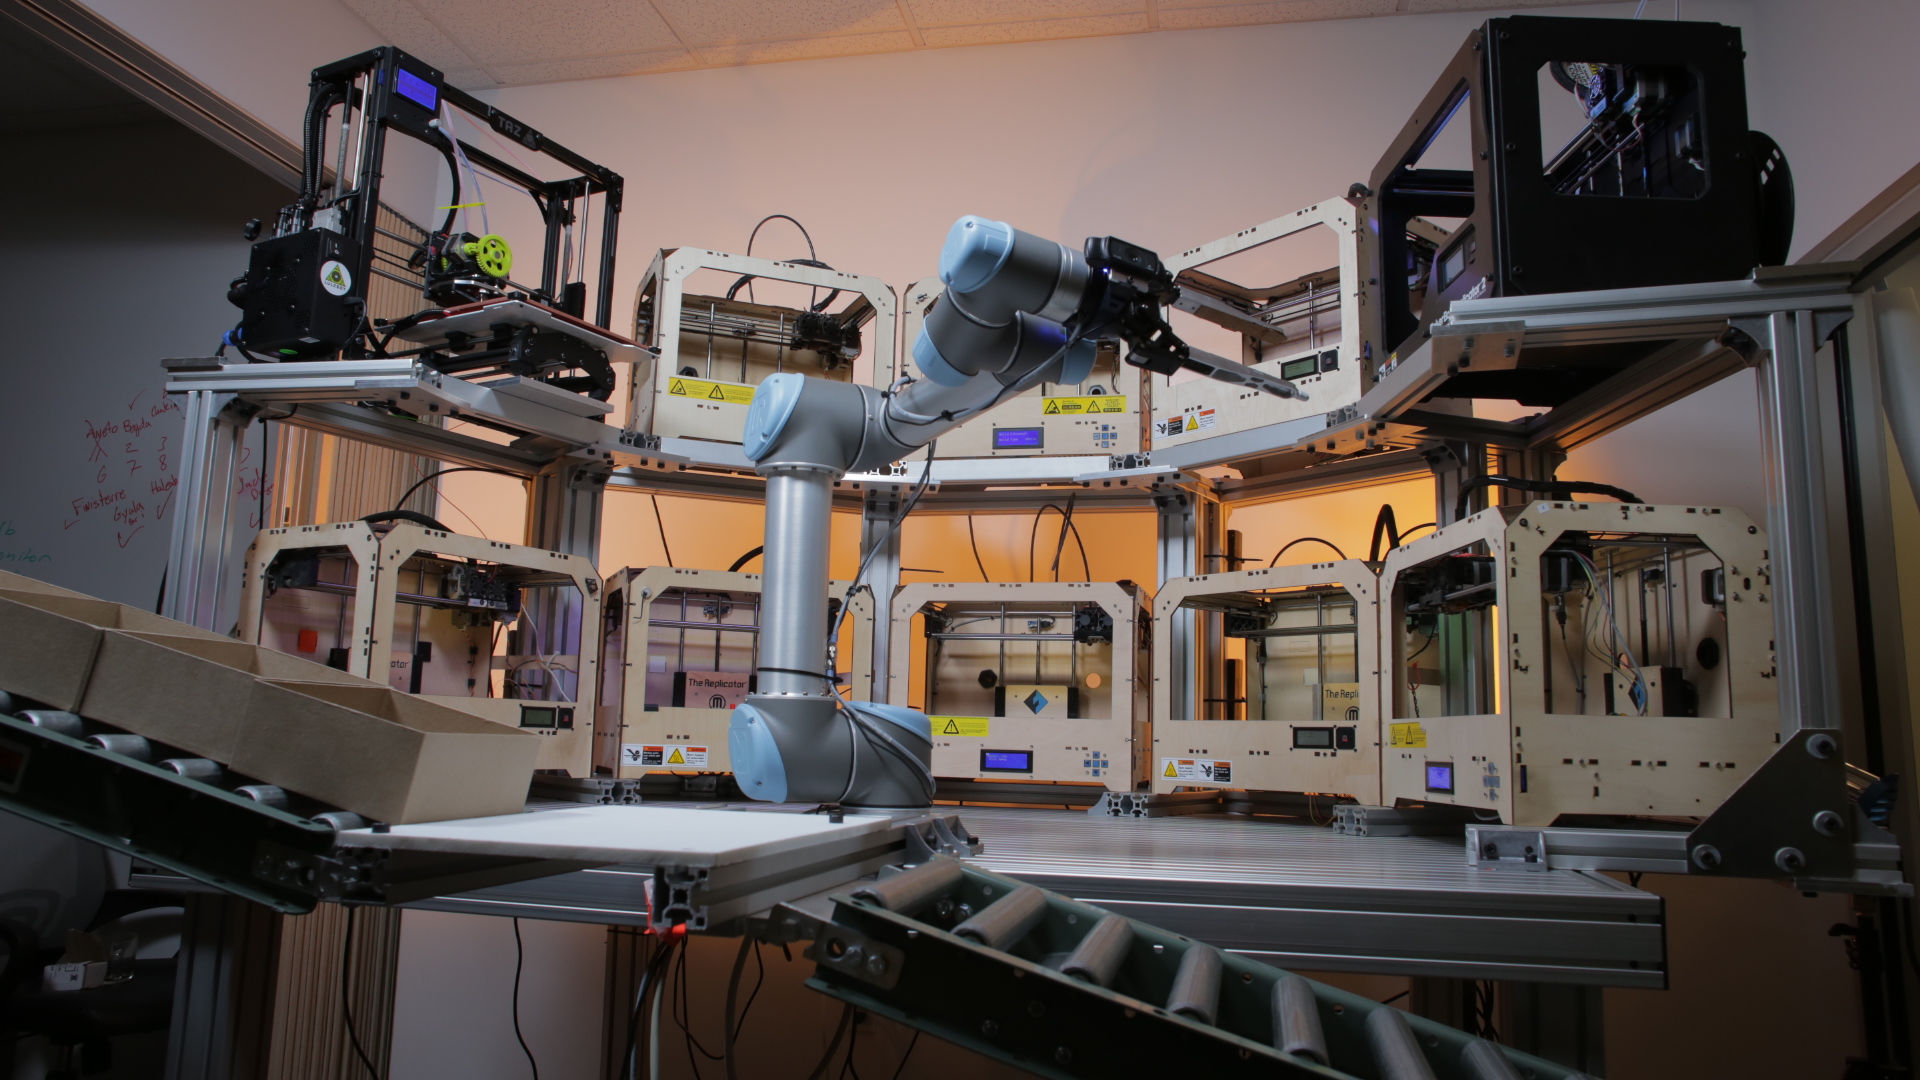  The Tend.ai system at work managing 3D printers 